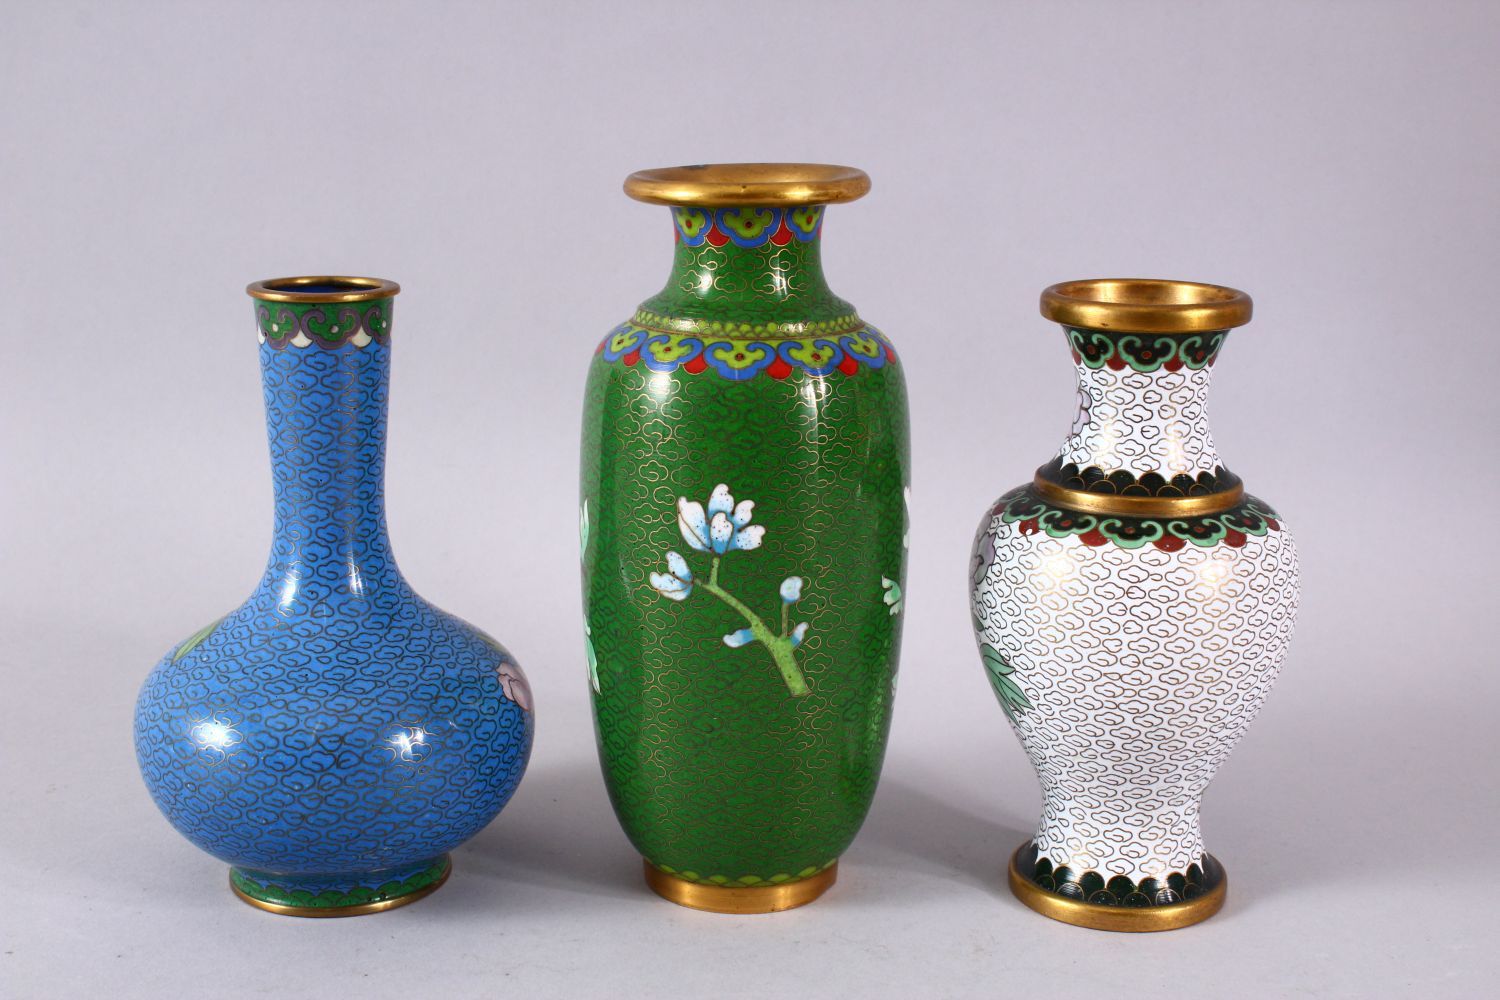 A MIXED LOT OF THREE CHINESE CLOISONNE VASES - the largest with a green ground with native Lotus - Image 6 of 8